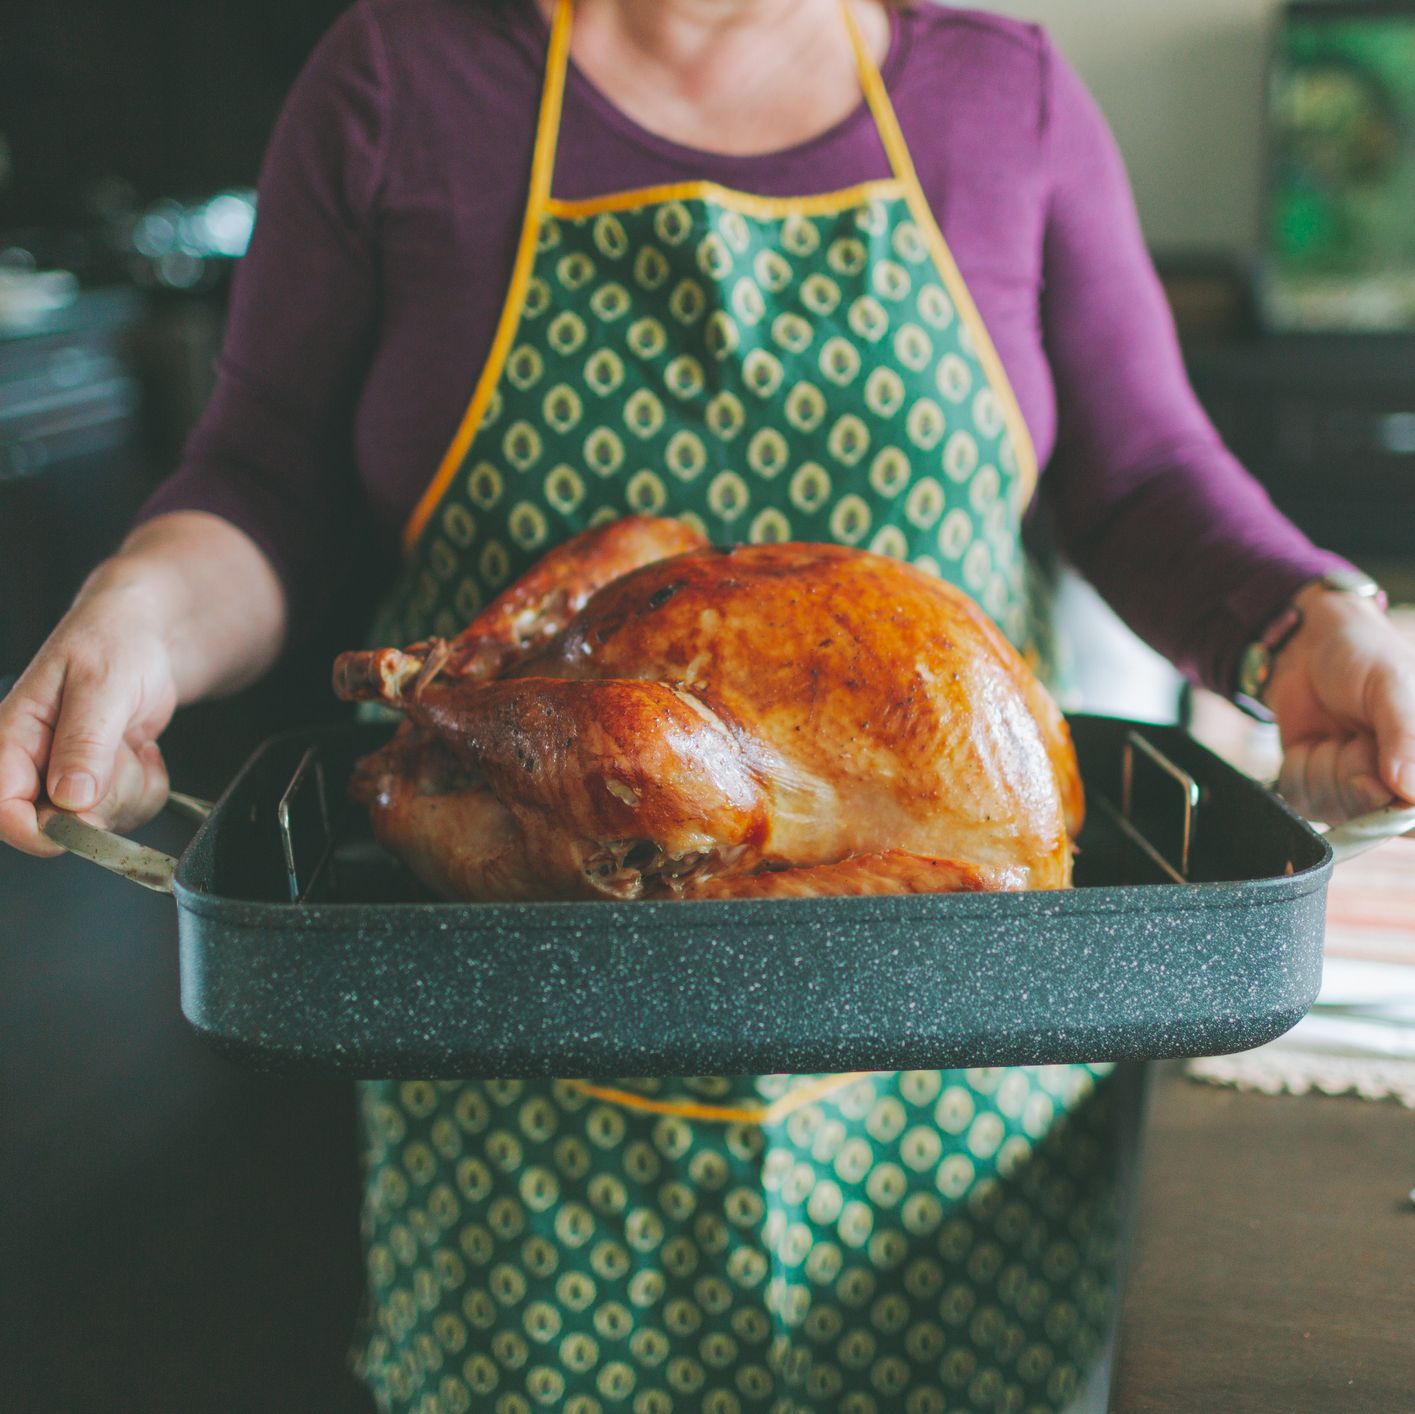 We Found Out If There Is Really Going to Be a Turkey Shortage for Thanksgiving